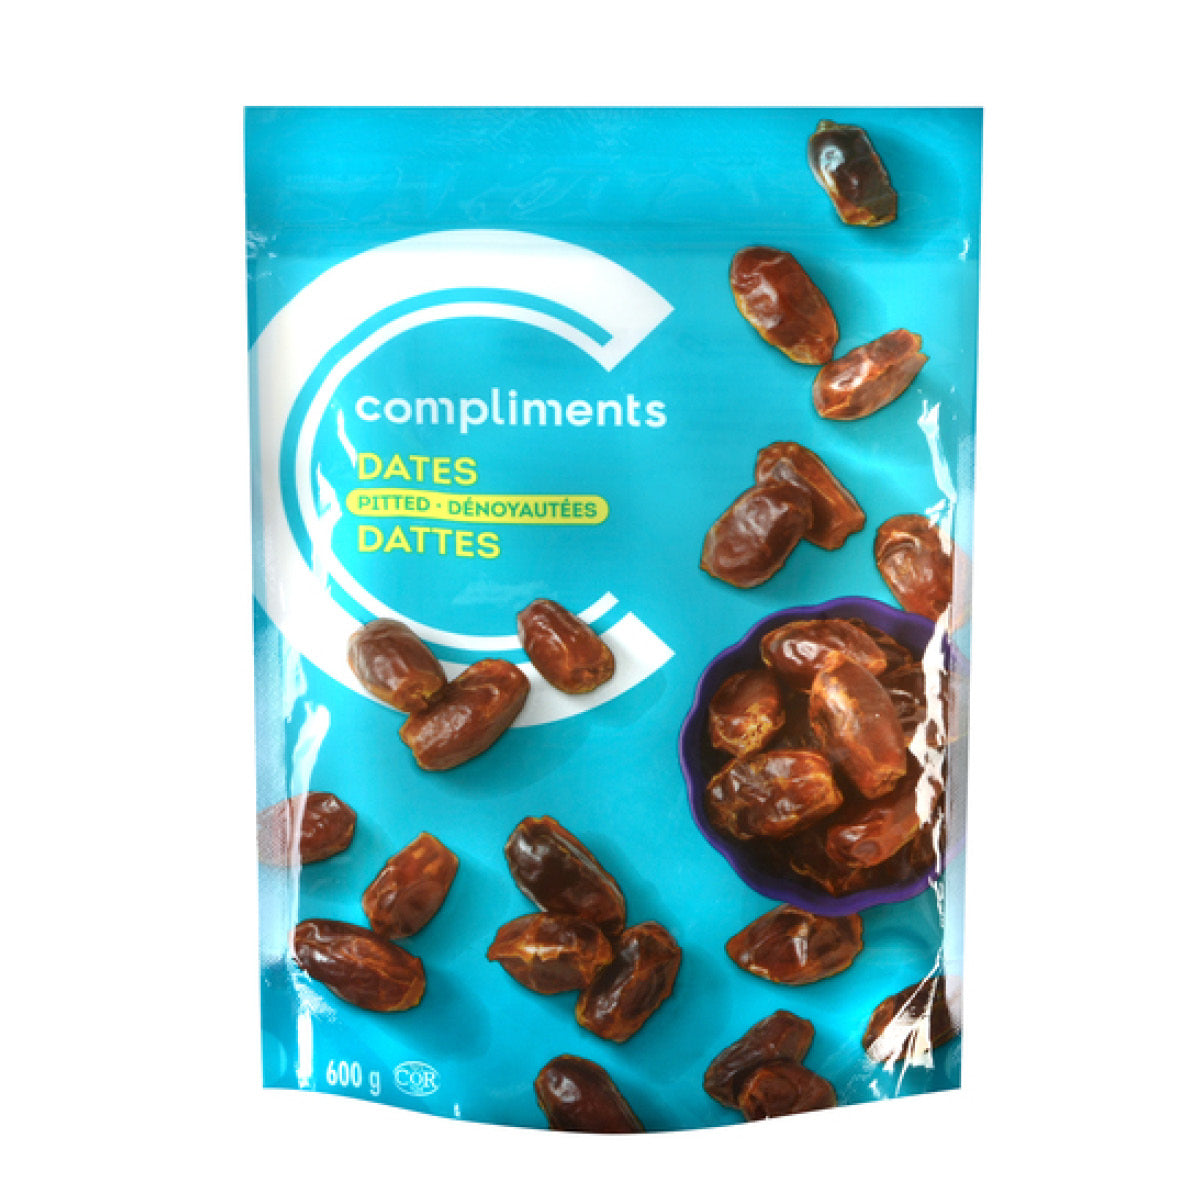 Compliments Pitted Dates 600g